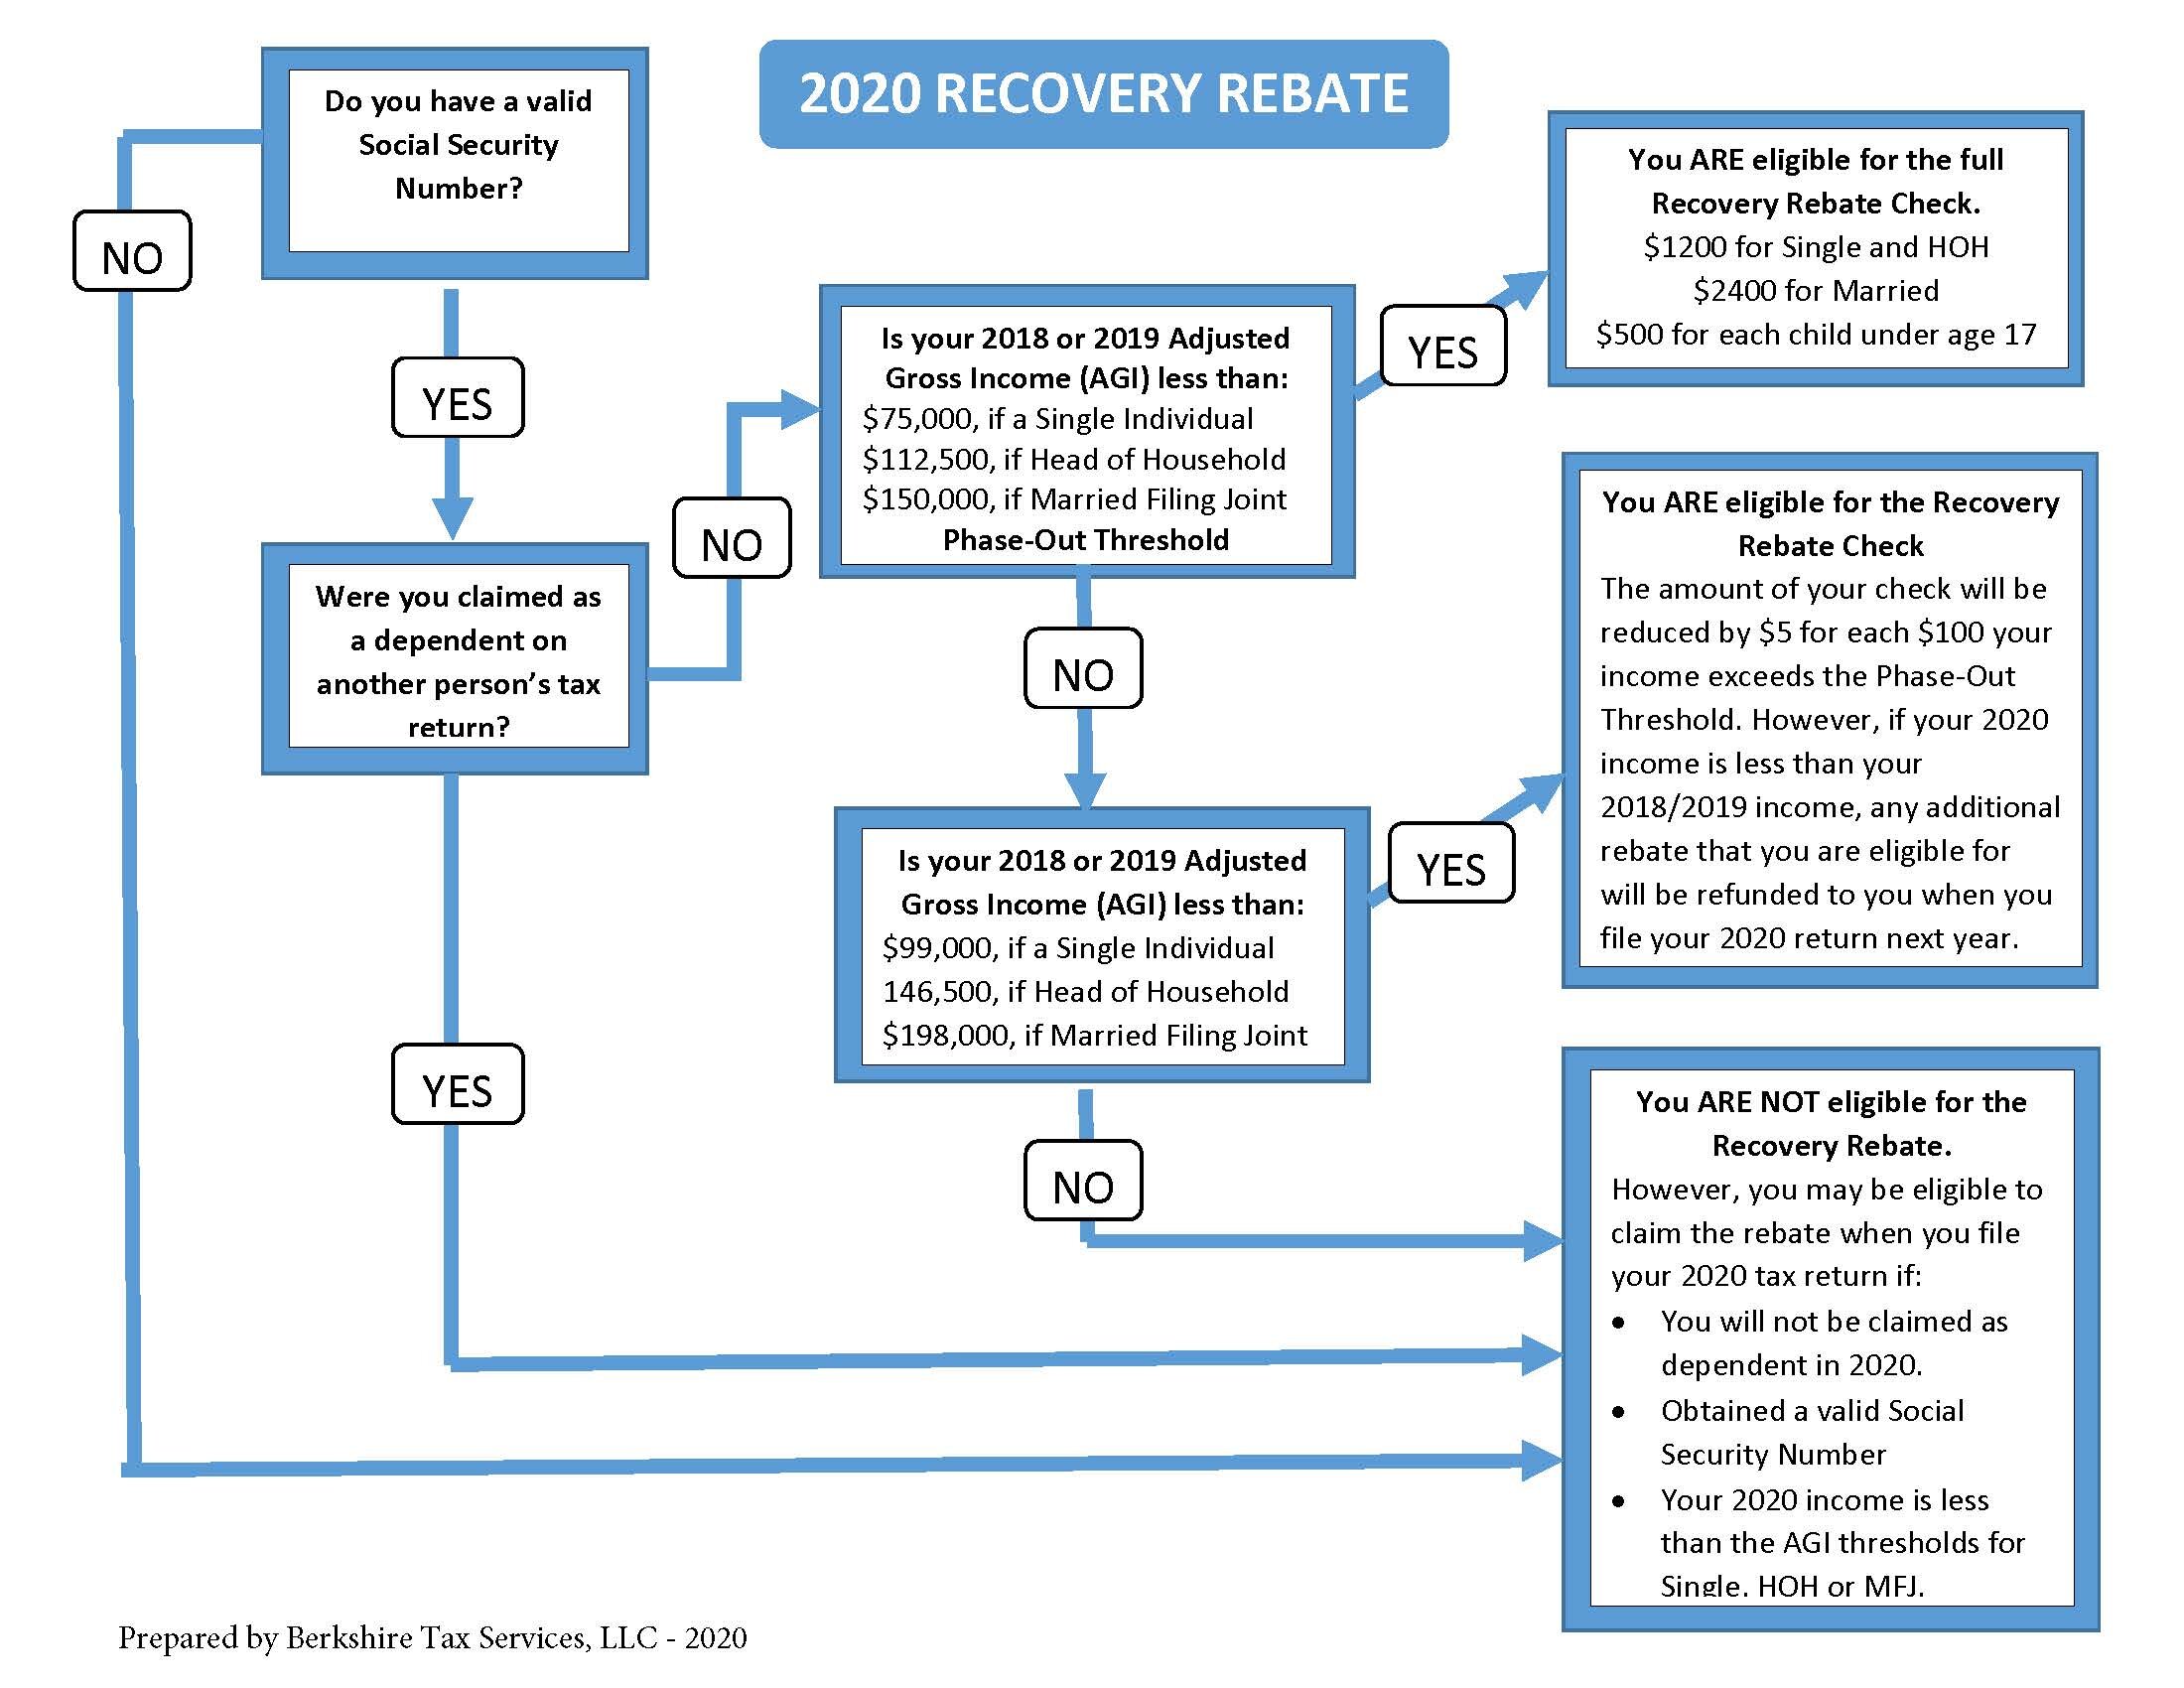 2020-recovery-rebate-credit-faqs-updated-again-business-it-is